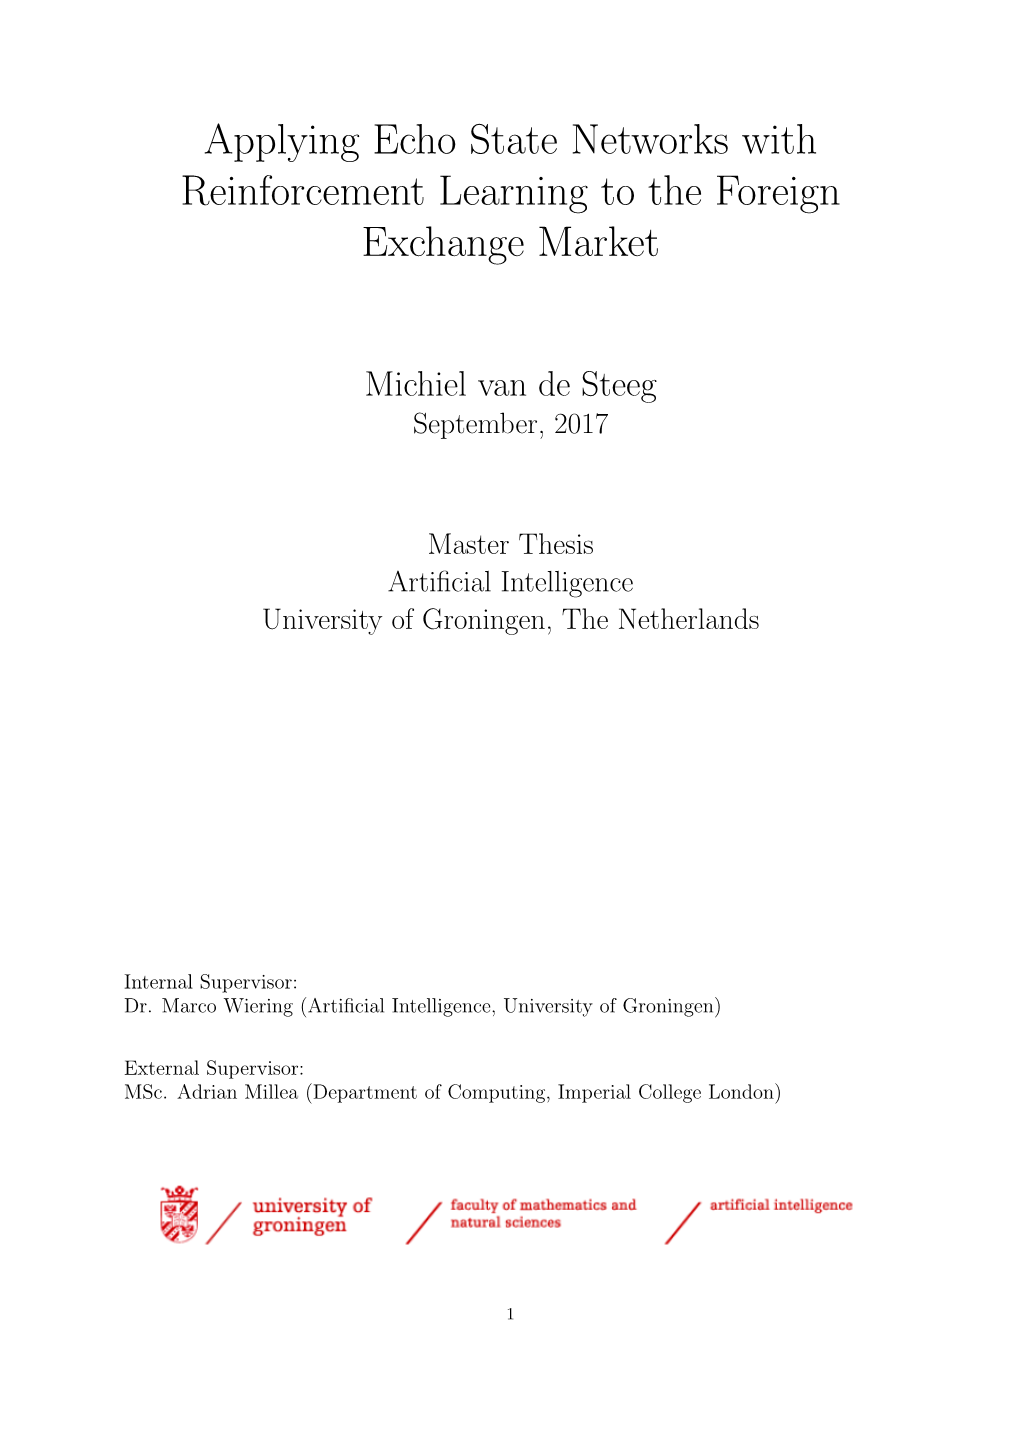 Applying Echo State Networks with Reinforcement Learning to the Foreign Exchange Market